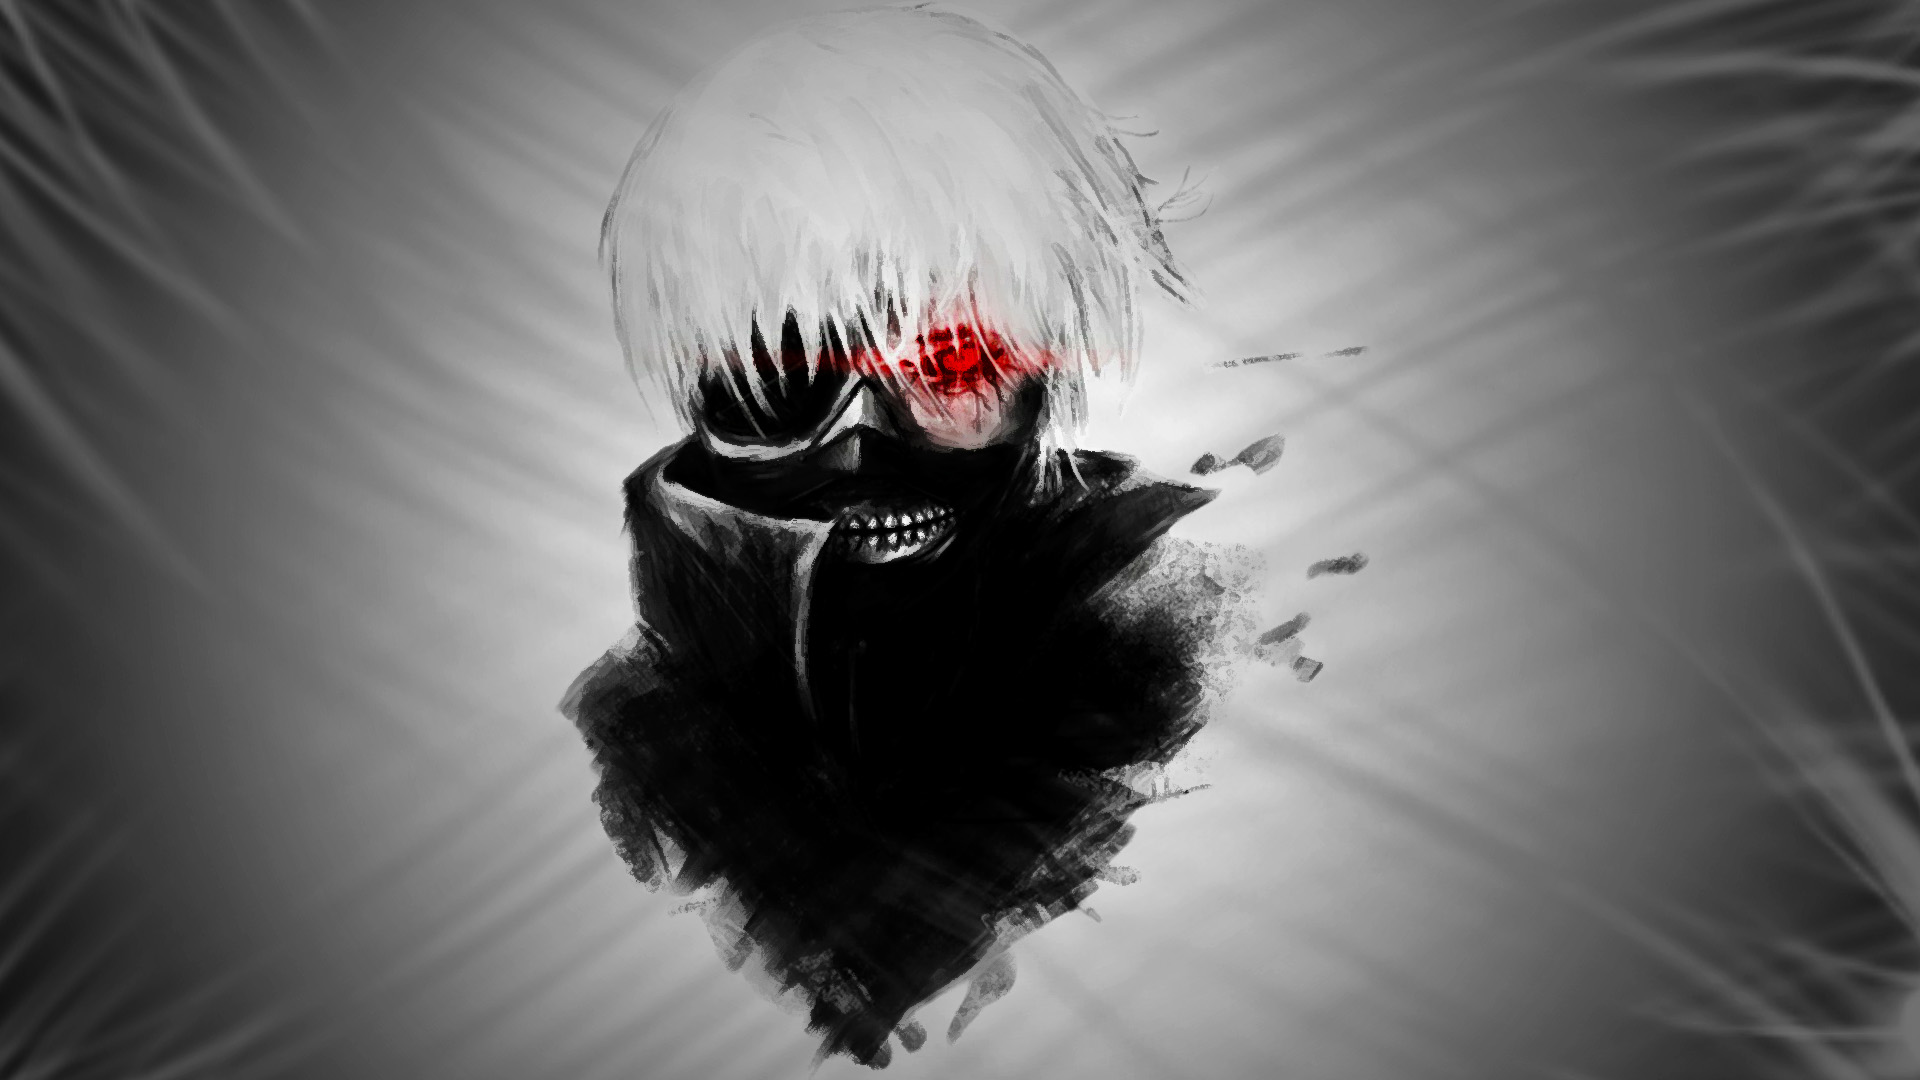 Tokyo Ghoul HD Wallpaper | Background Image | 1920x1080 | ID:989768